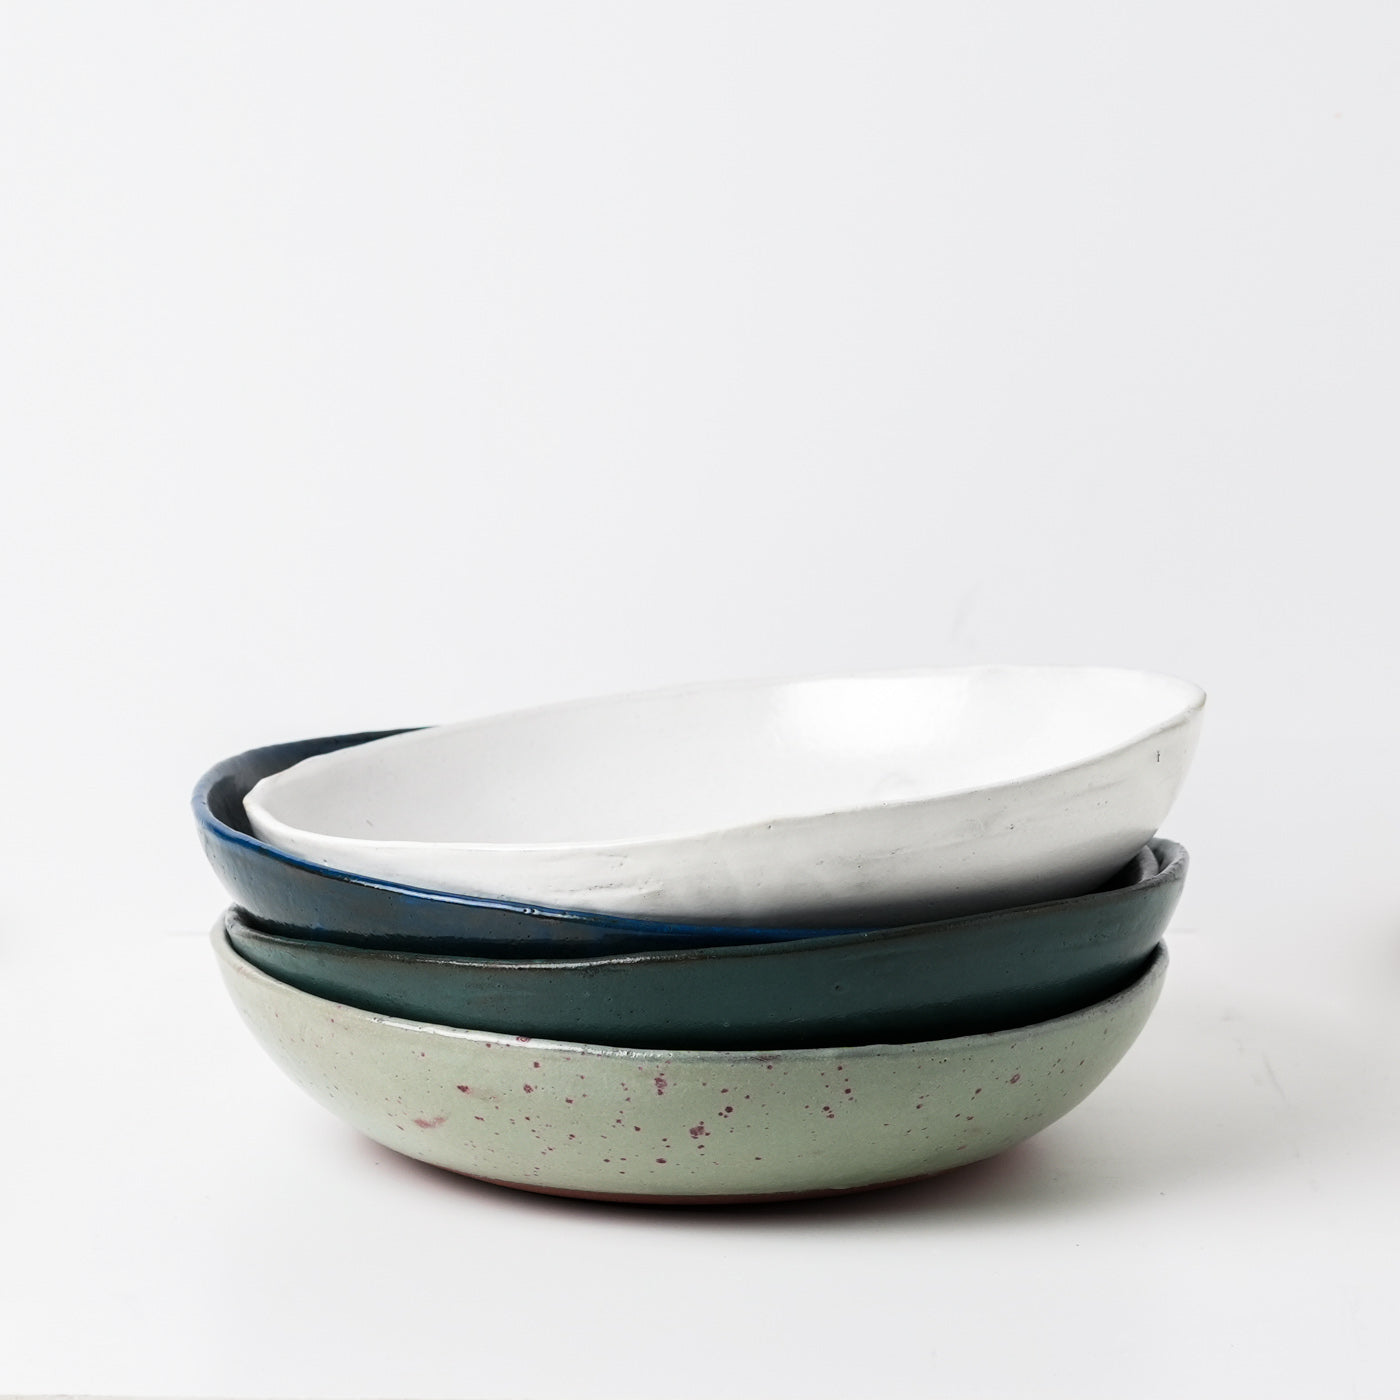 Emerald green hand thrown ceramic pasta bowl by Gaëlle Le Doledec